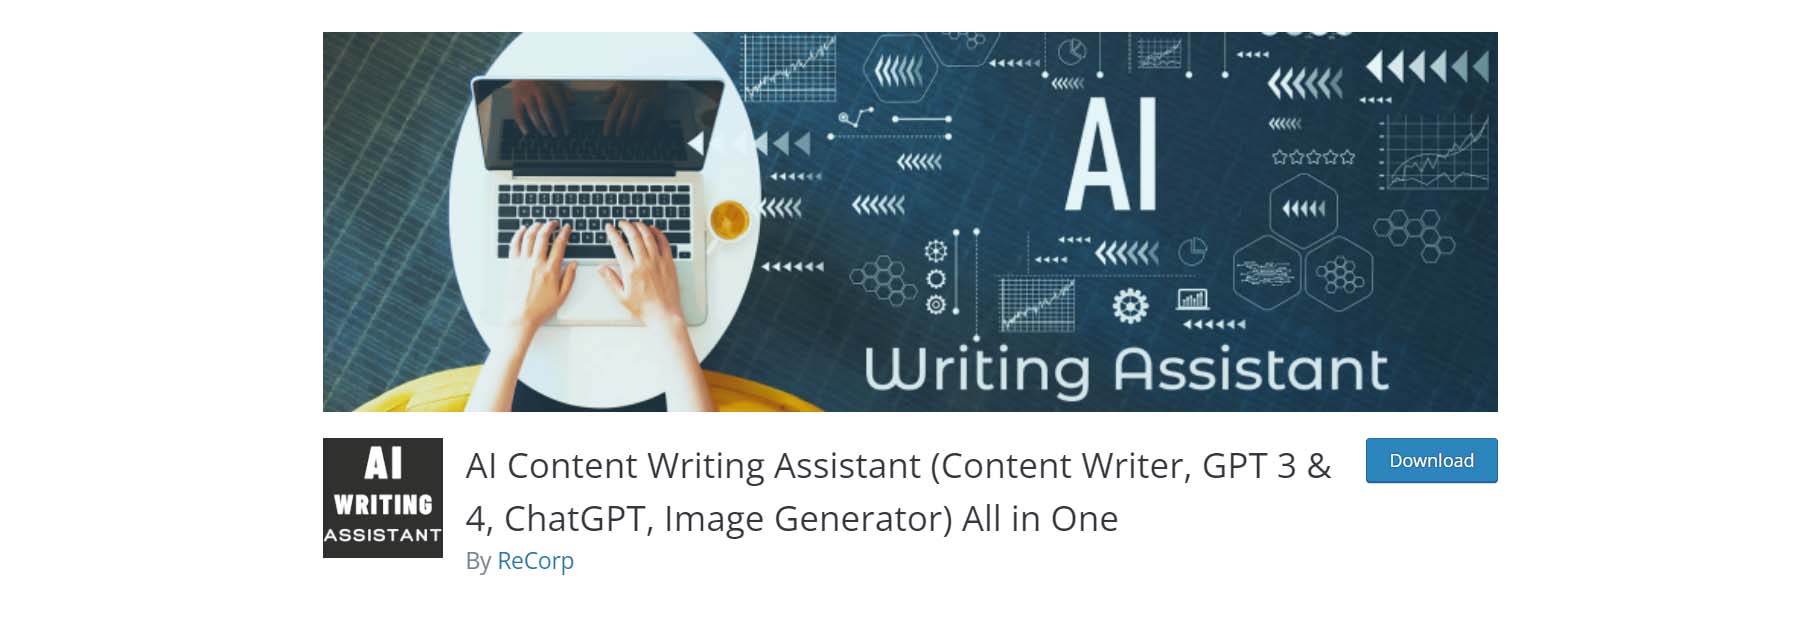 AI Content Writing Assistant